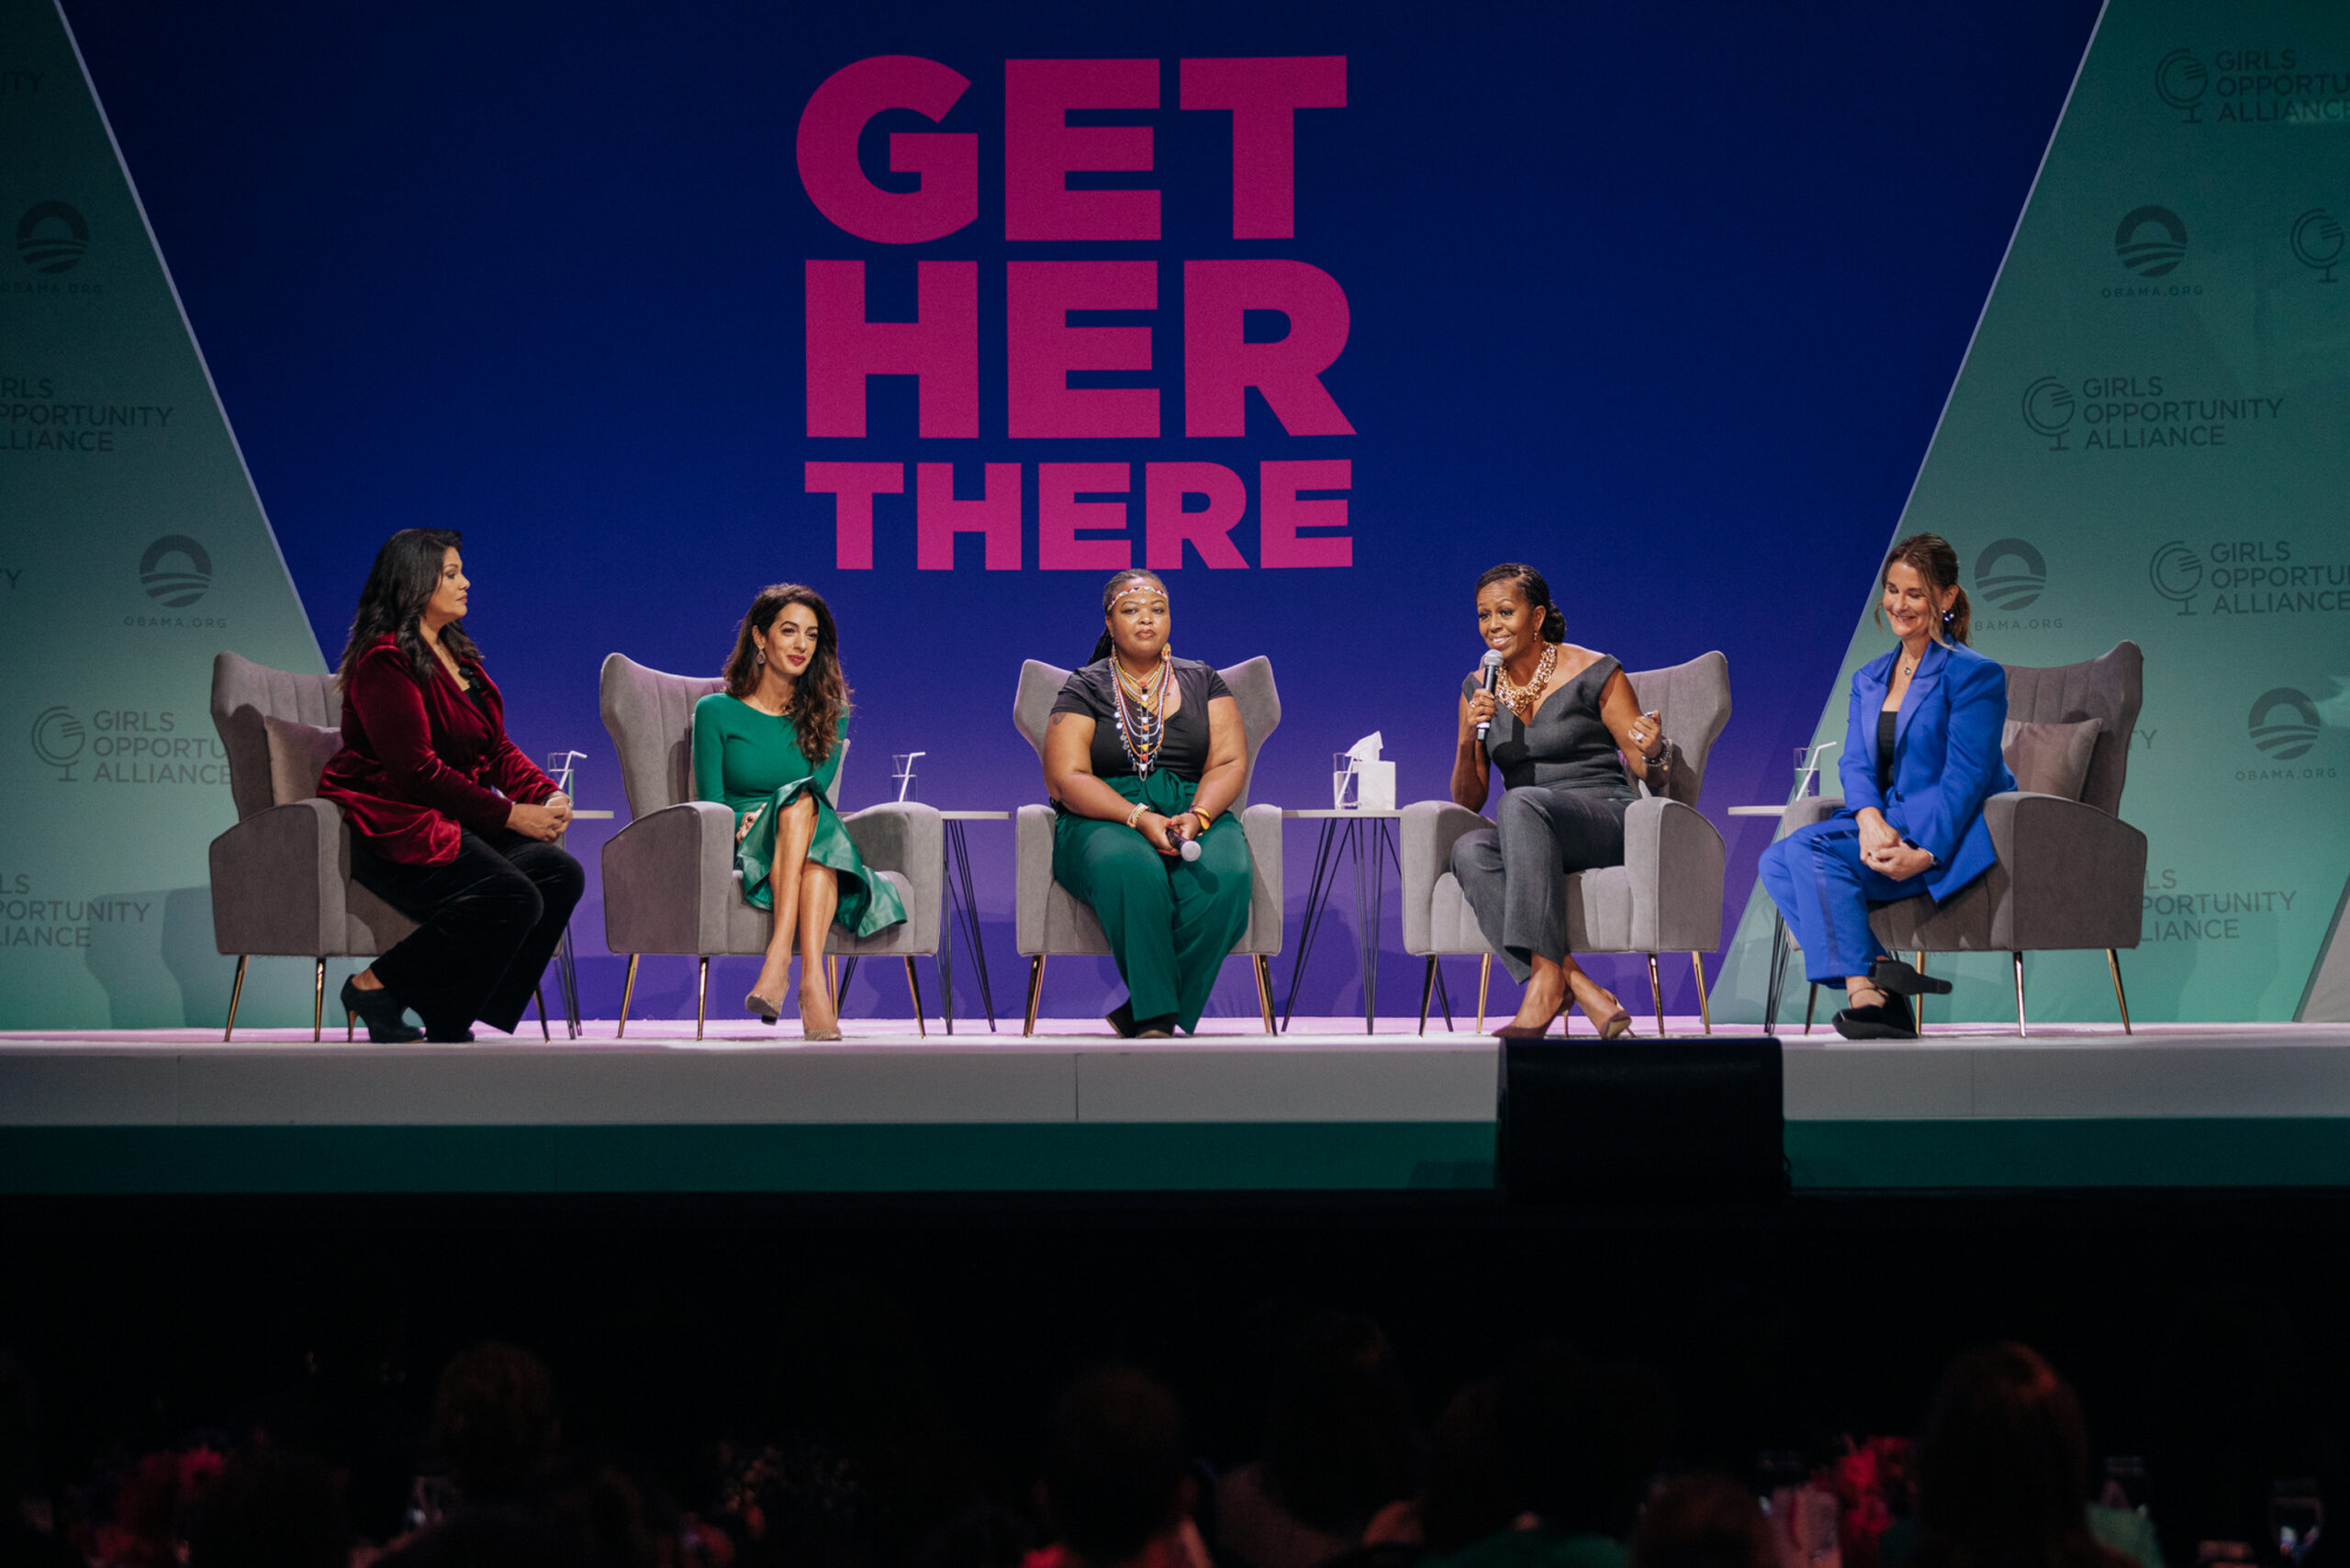 From left to right, Sara Sidner moderates a panel with Amal Clooney, Wanjiru Wahome, Michelle Obama, and Melinda French Gates